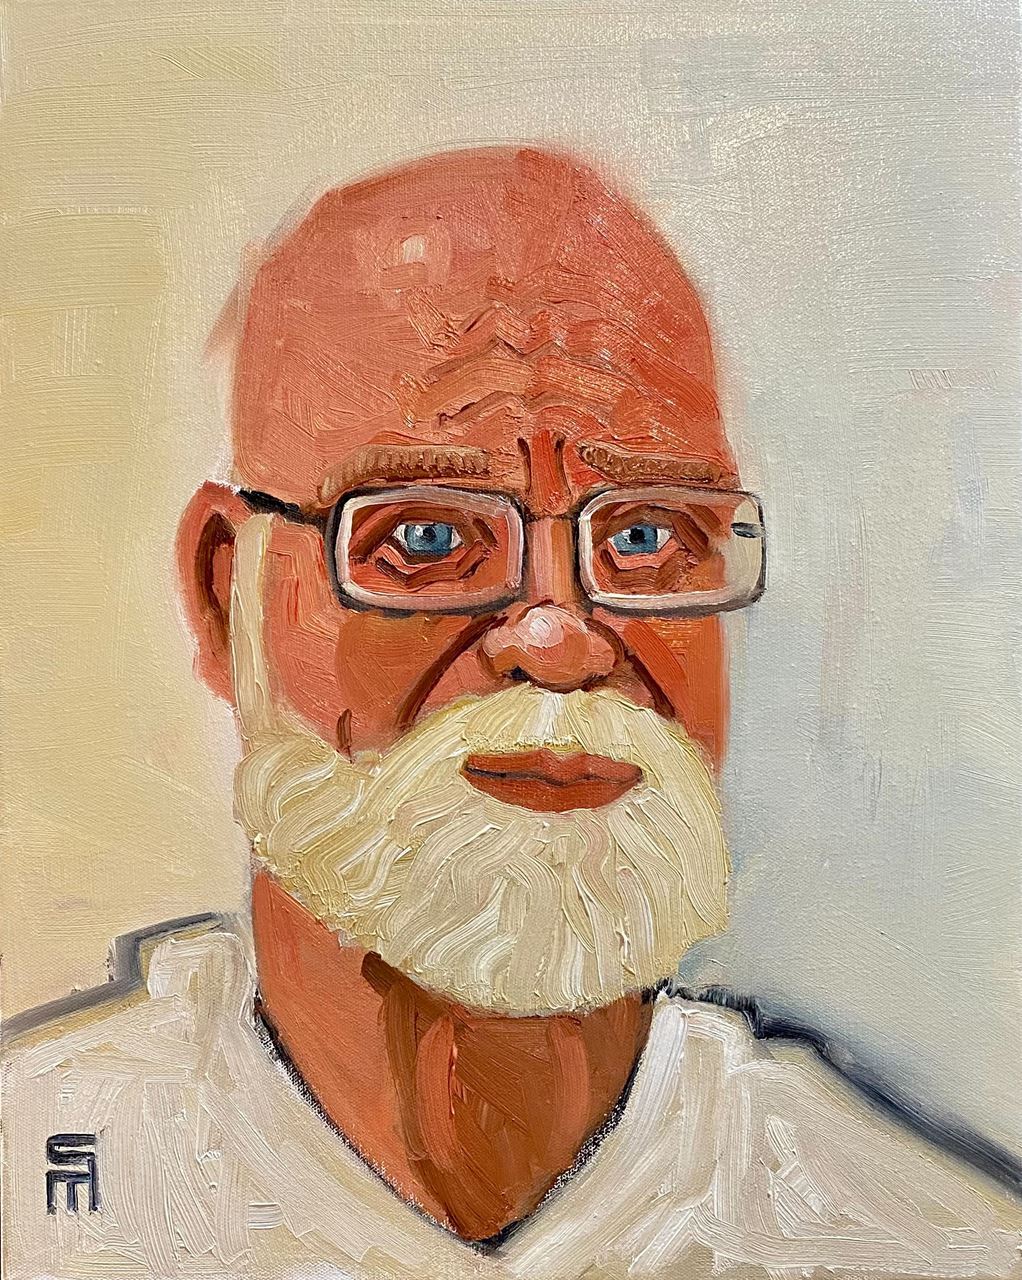 Self portrait painting of the artist.  Image is of a man, bald with a d full beard.  Blonde and white hair, blue eyes with square glasses. He is wearing a white shirt. Background is off white.